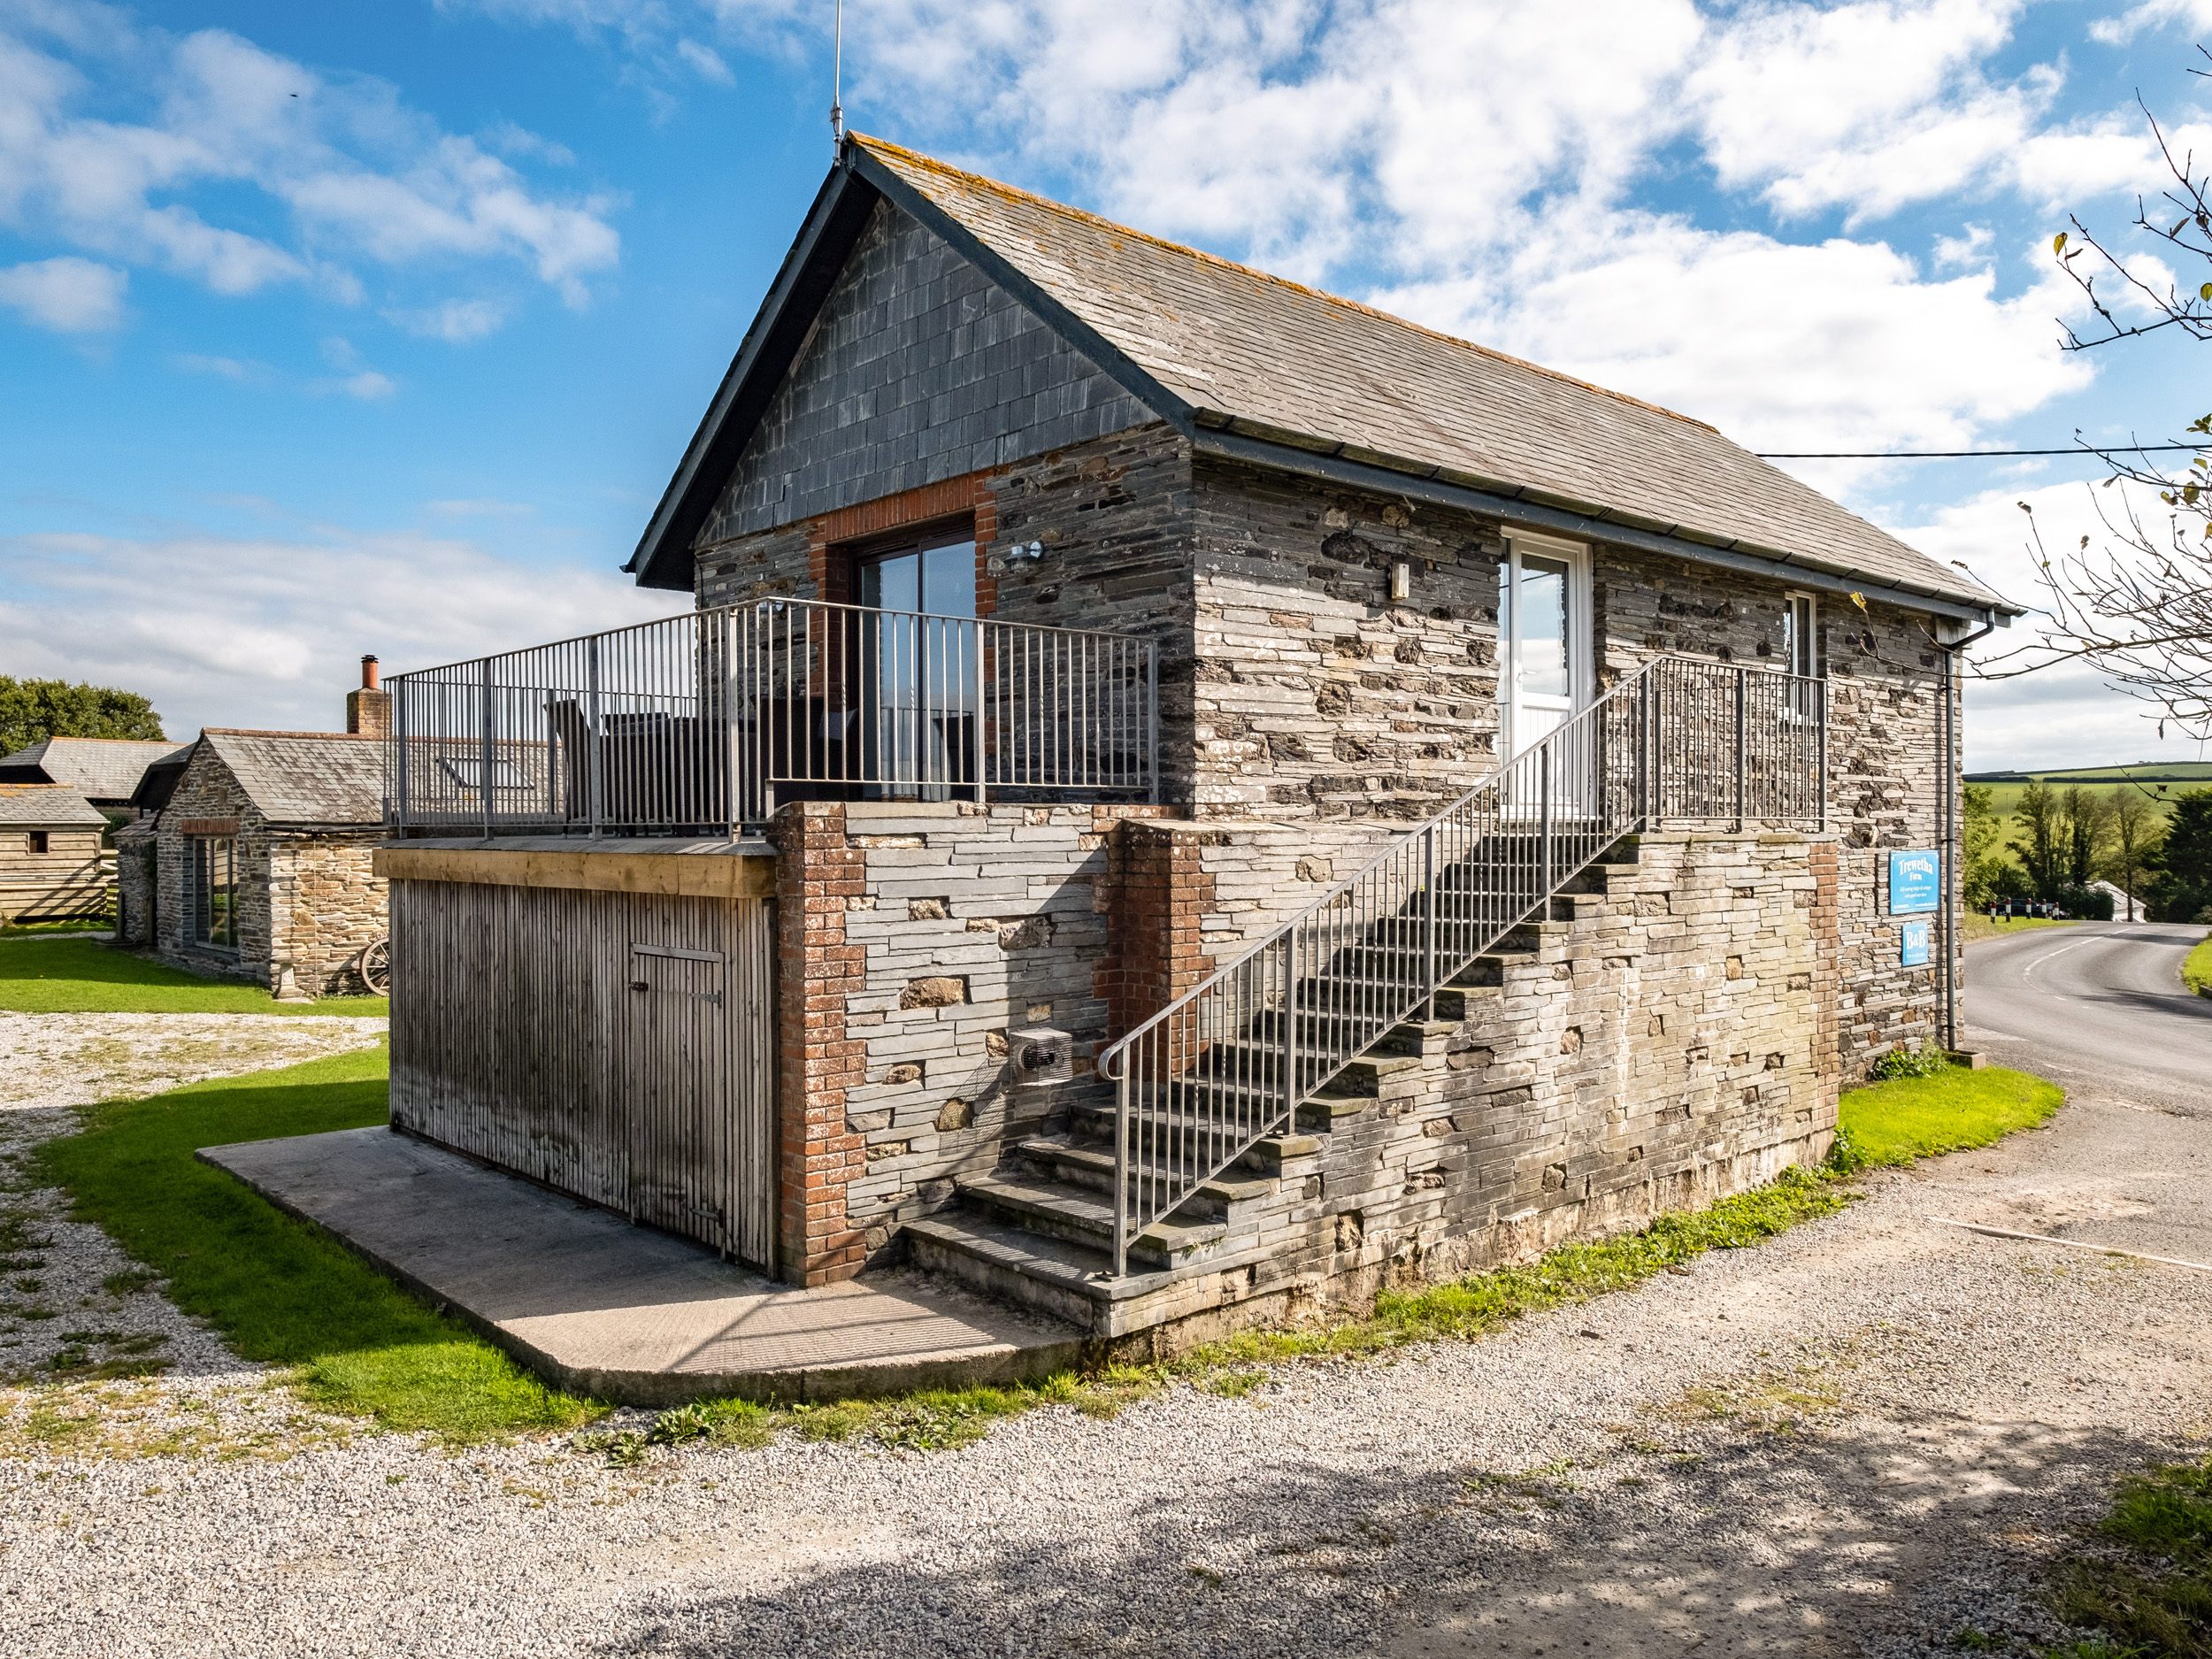 2 bedroom Cottage for rent in Port Isaac